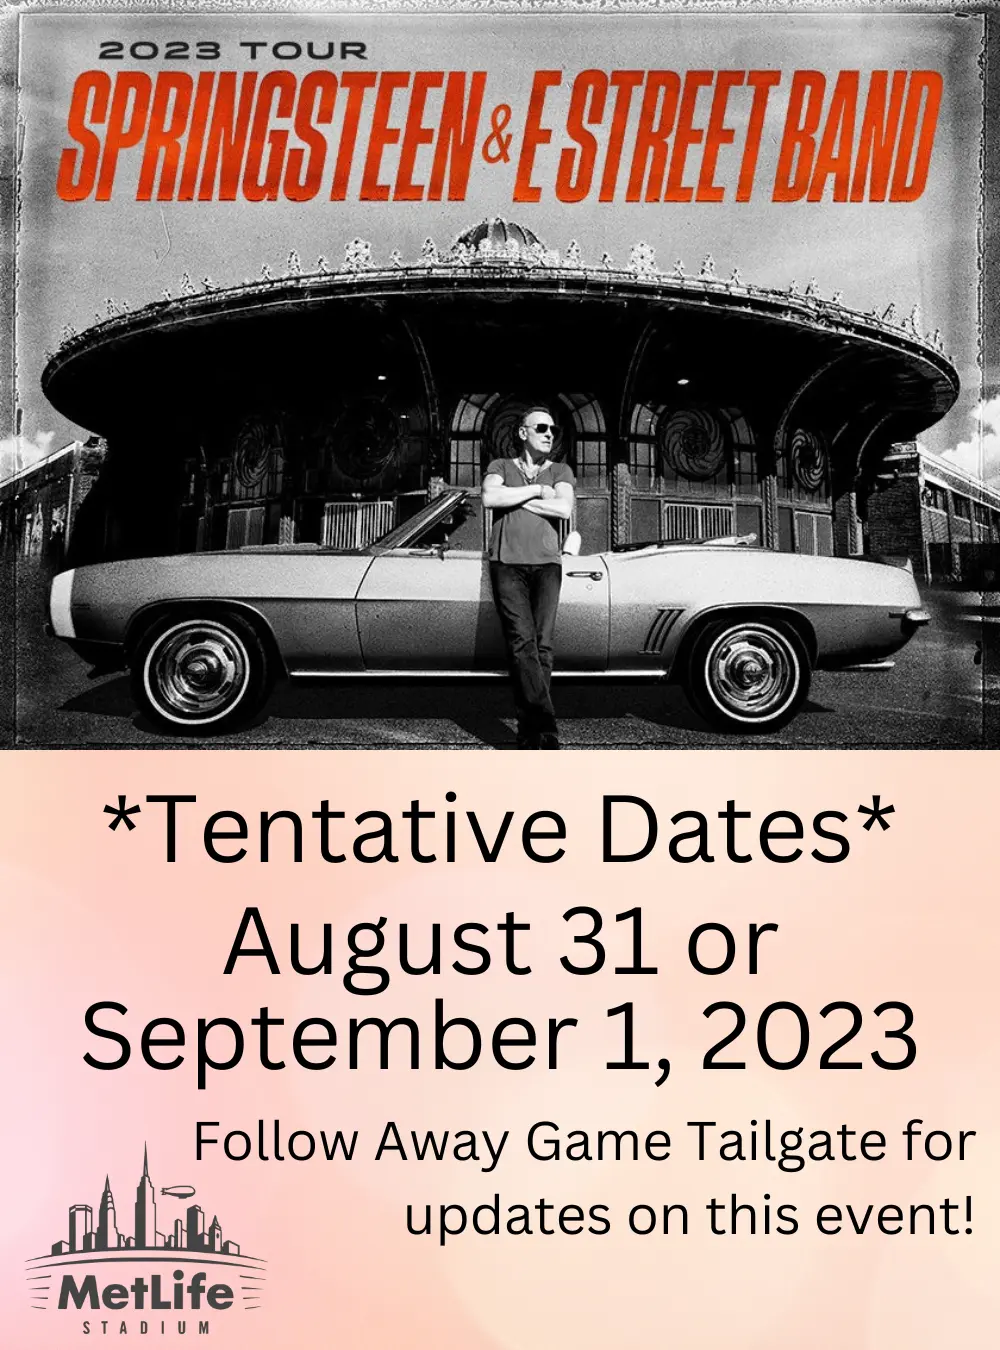 Bruce Springsteen and E street Band Tour 2023 MetLife Stadium Tailgate